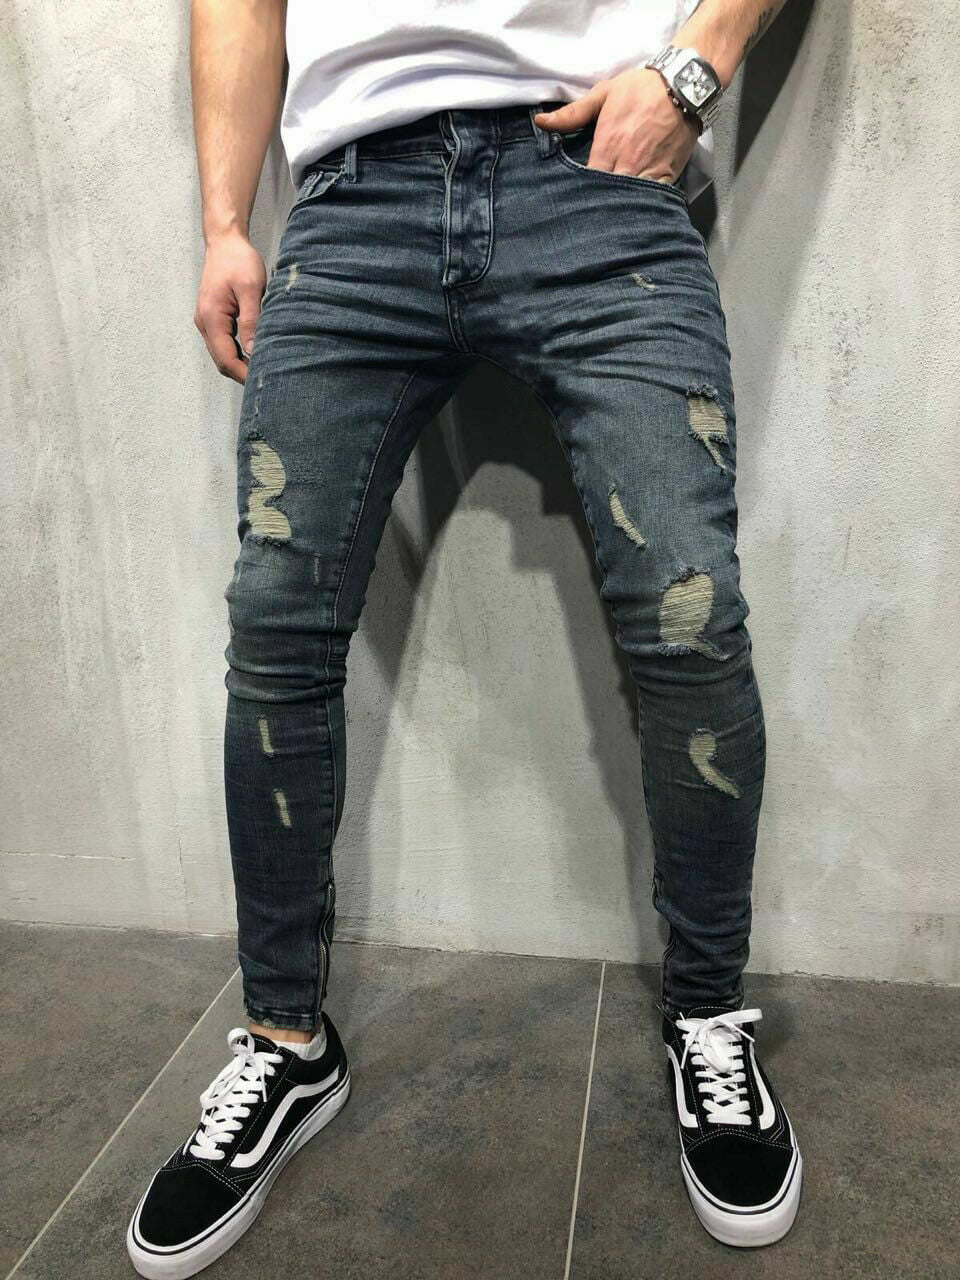 Mens Skinny Ripped Jeans Distressed Casual Destroyed Denim Pants Design Trousers 